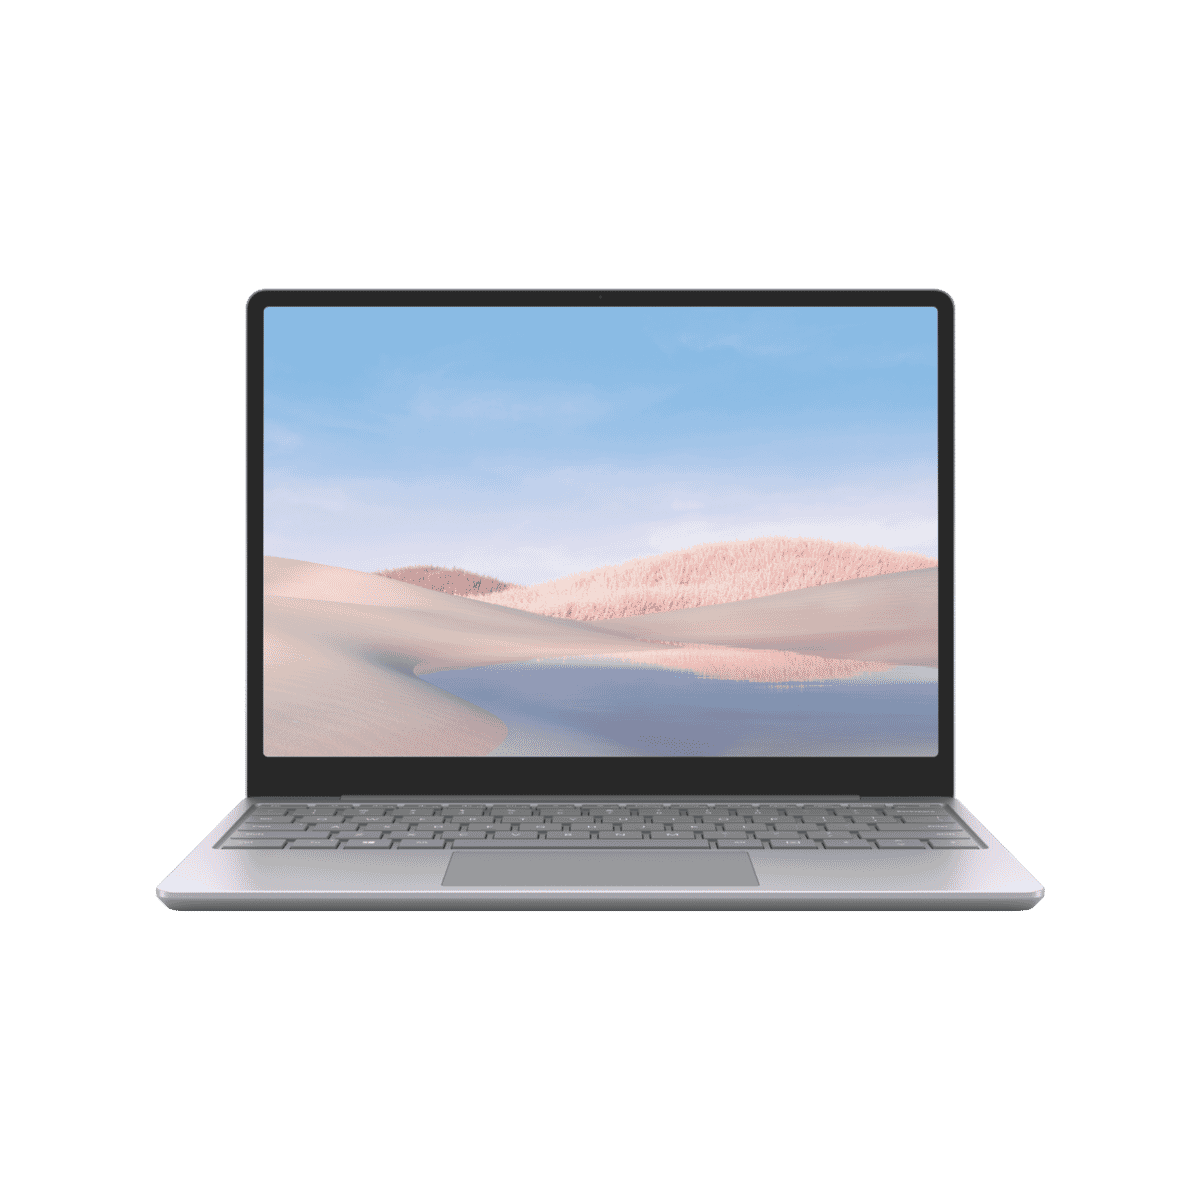 Microsoft THJ-00016 Surface Laptop Go 12.4" i5 8GB 256GB Pl at The Good